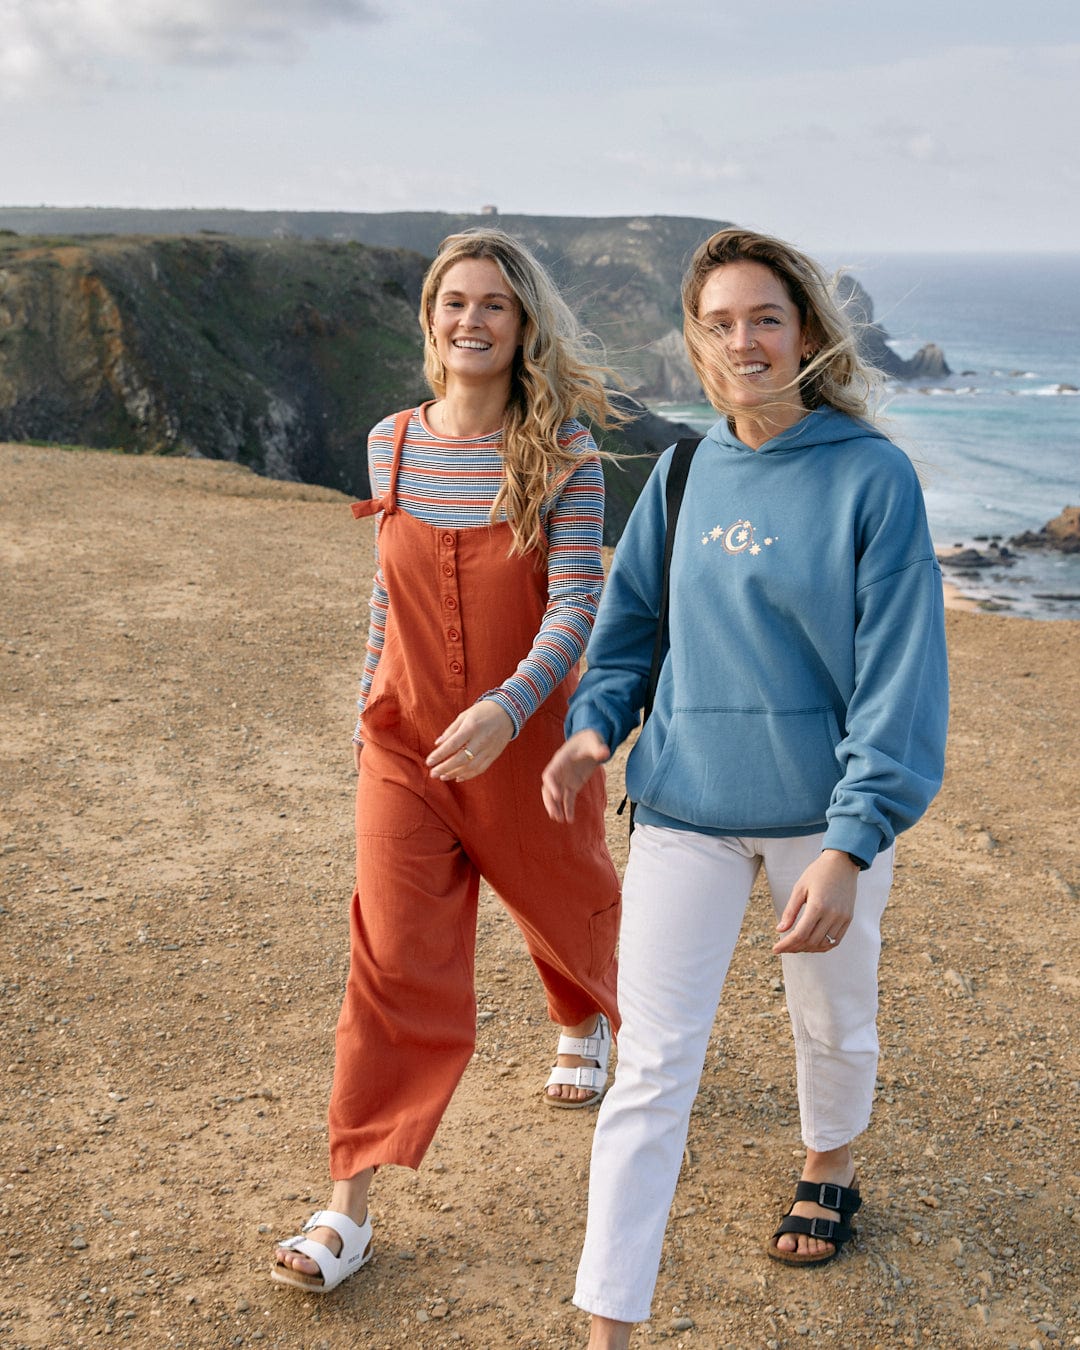 Two women walking outdoors near a coastal cliffside, dressed in casual attire, one in a red jumpsuit and a striped shirt embellished with floral patterns, the other in white pants and a Better Days - Womens Pop Hoodie - Blue from Saltrock.